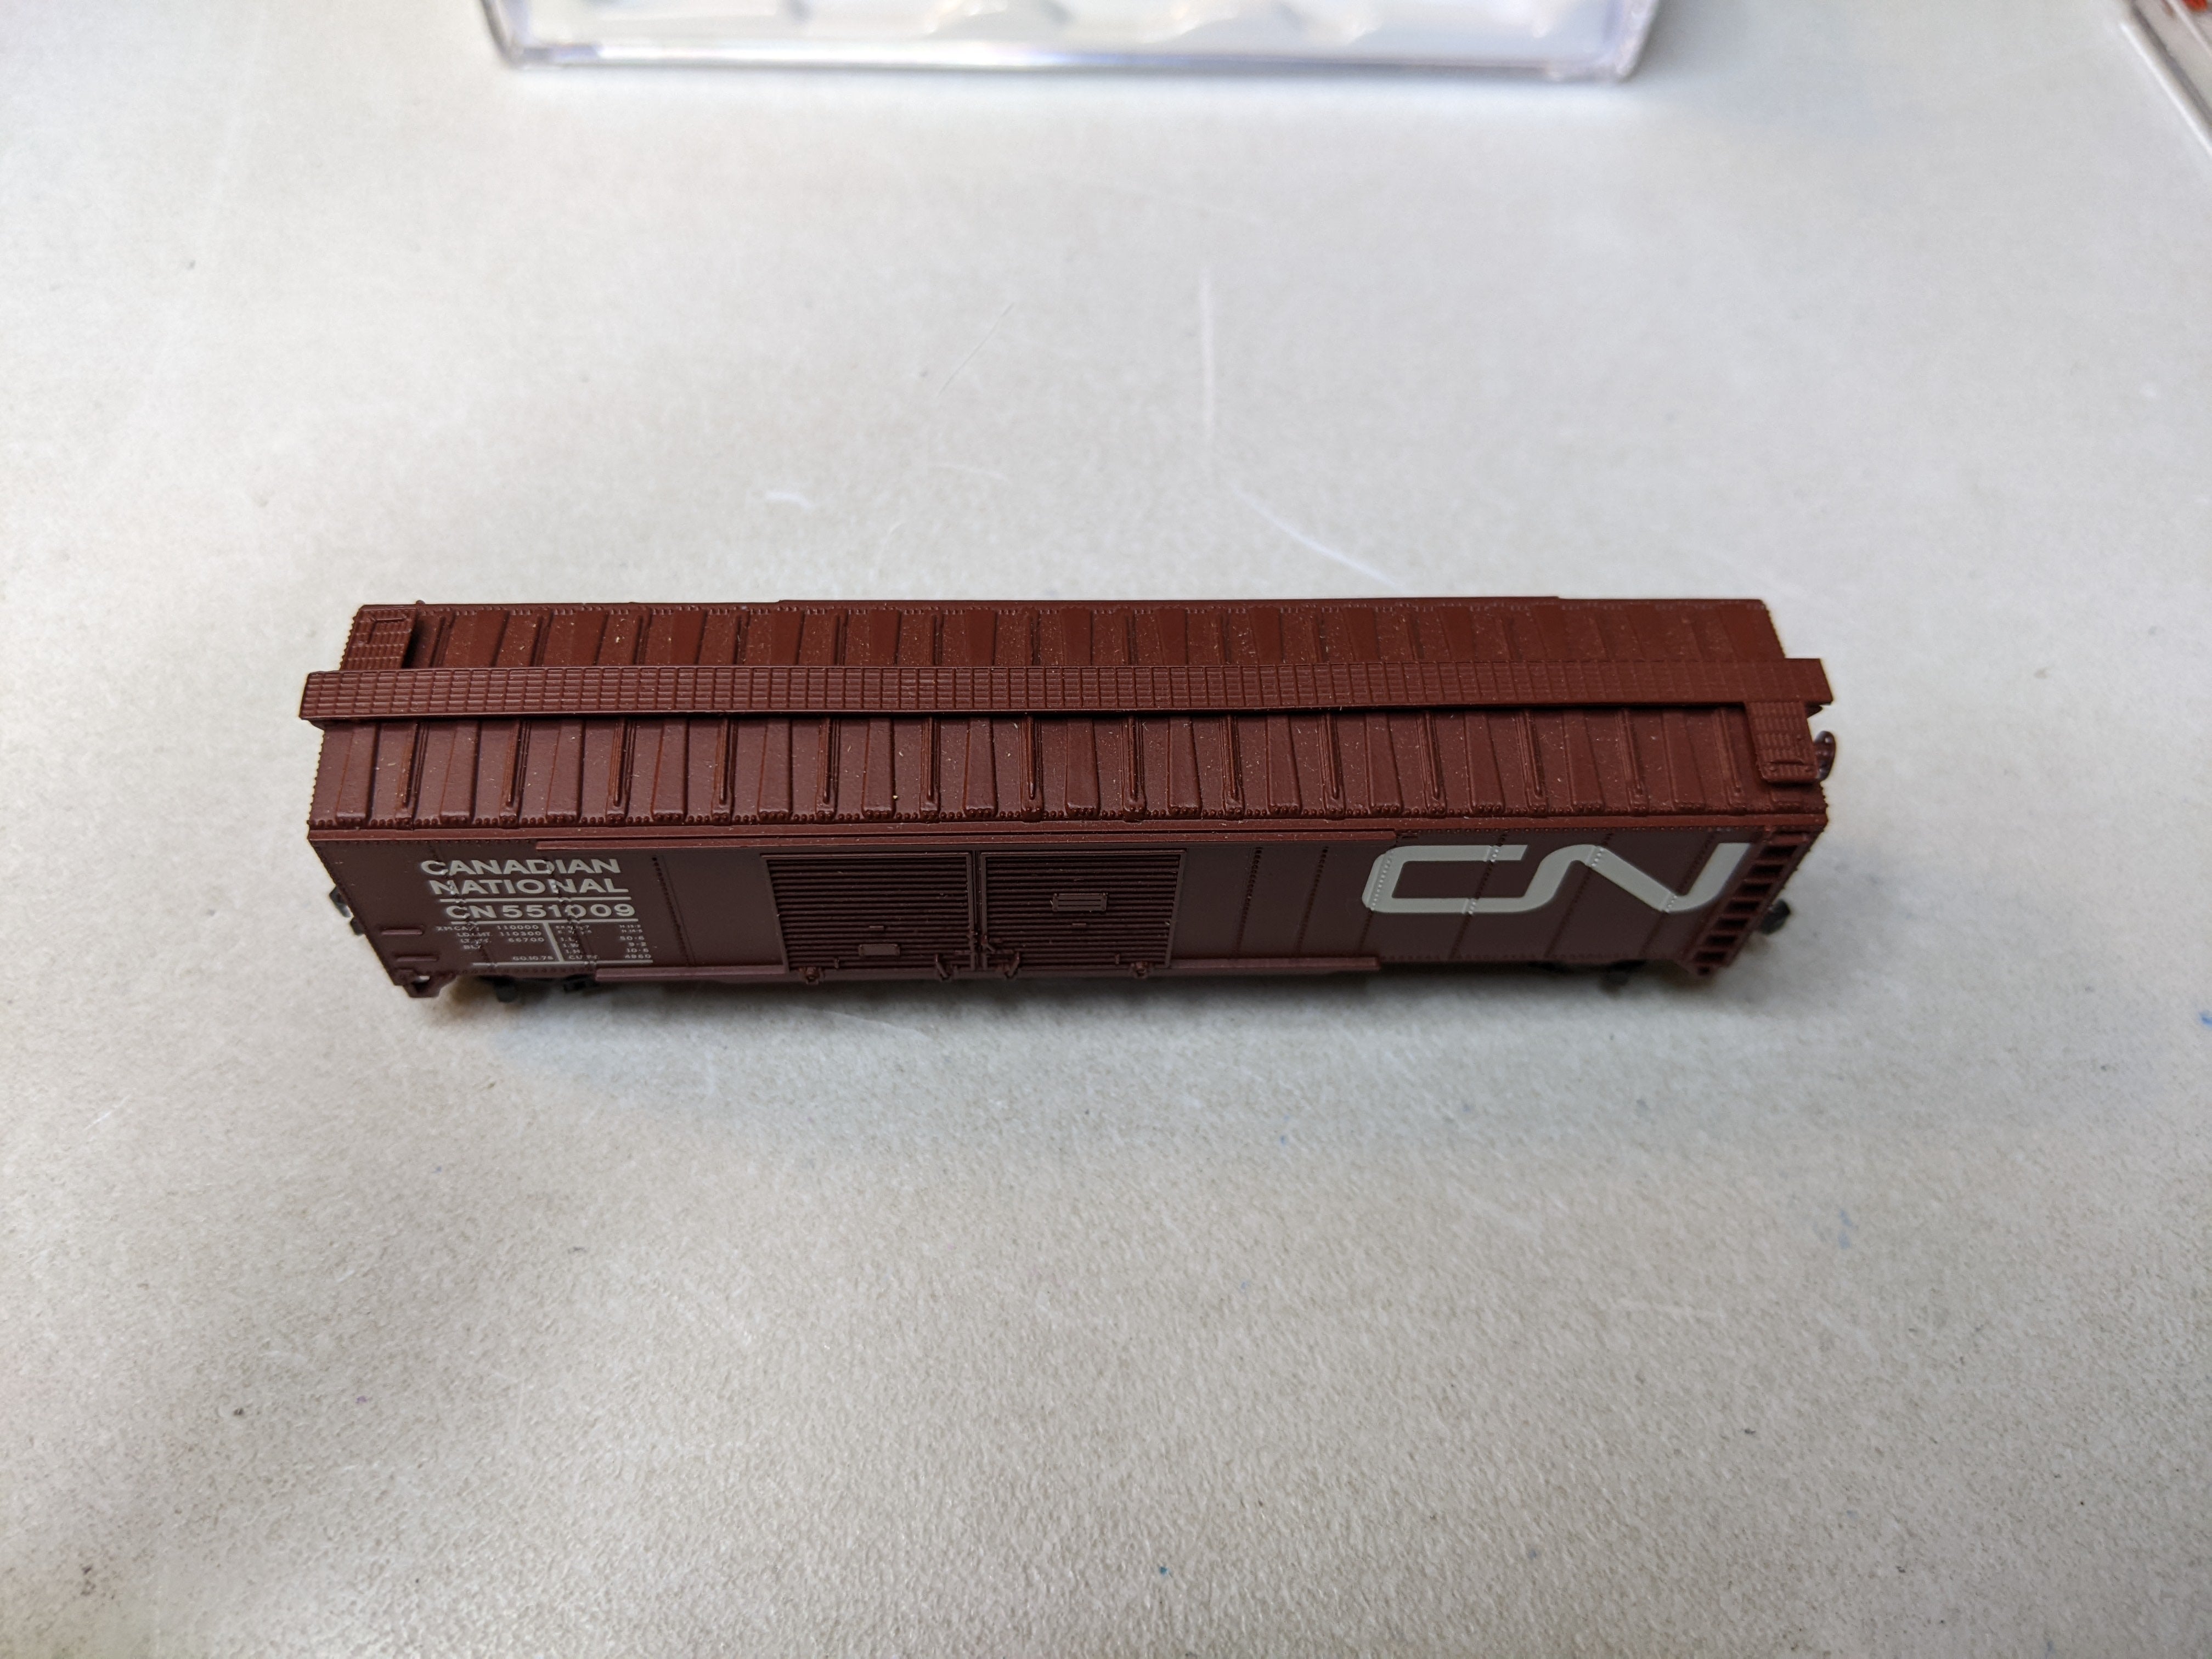 USED Atlas 50003630 N Scale, 50' DOUBLE DOOR BOX CAR, Canadian National CN #551009